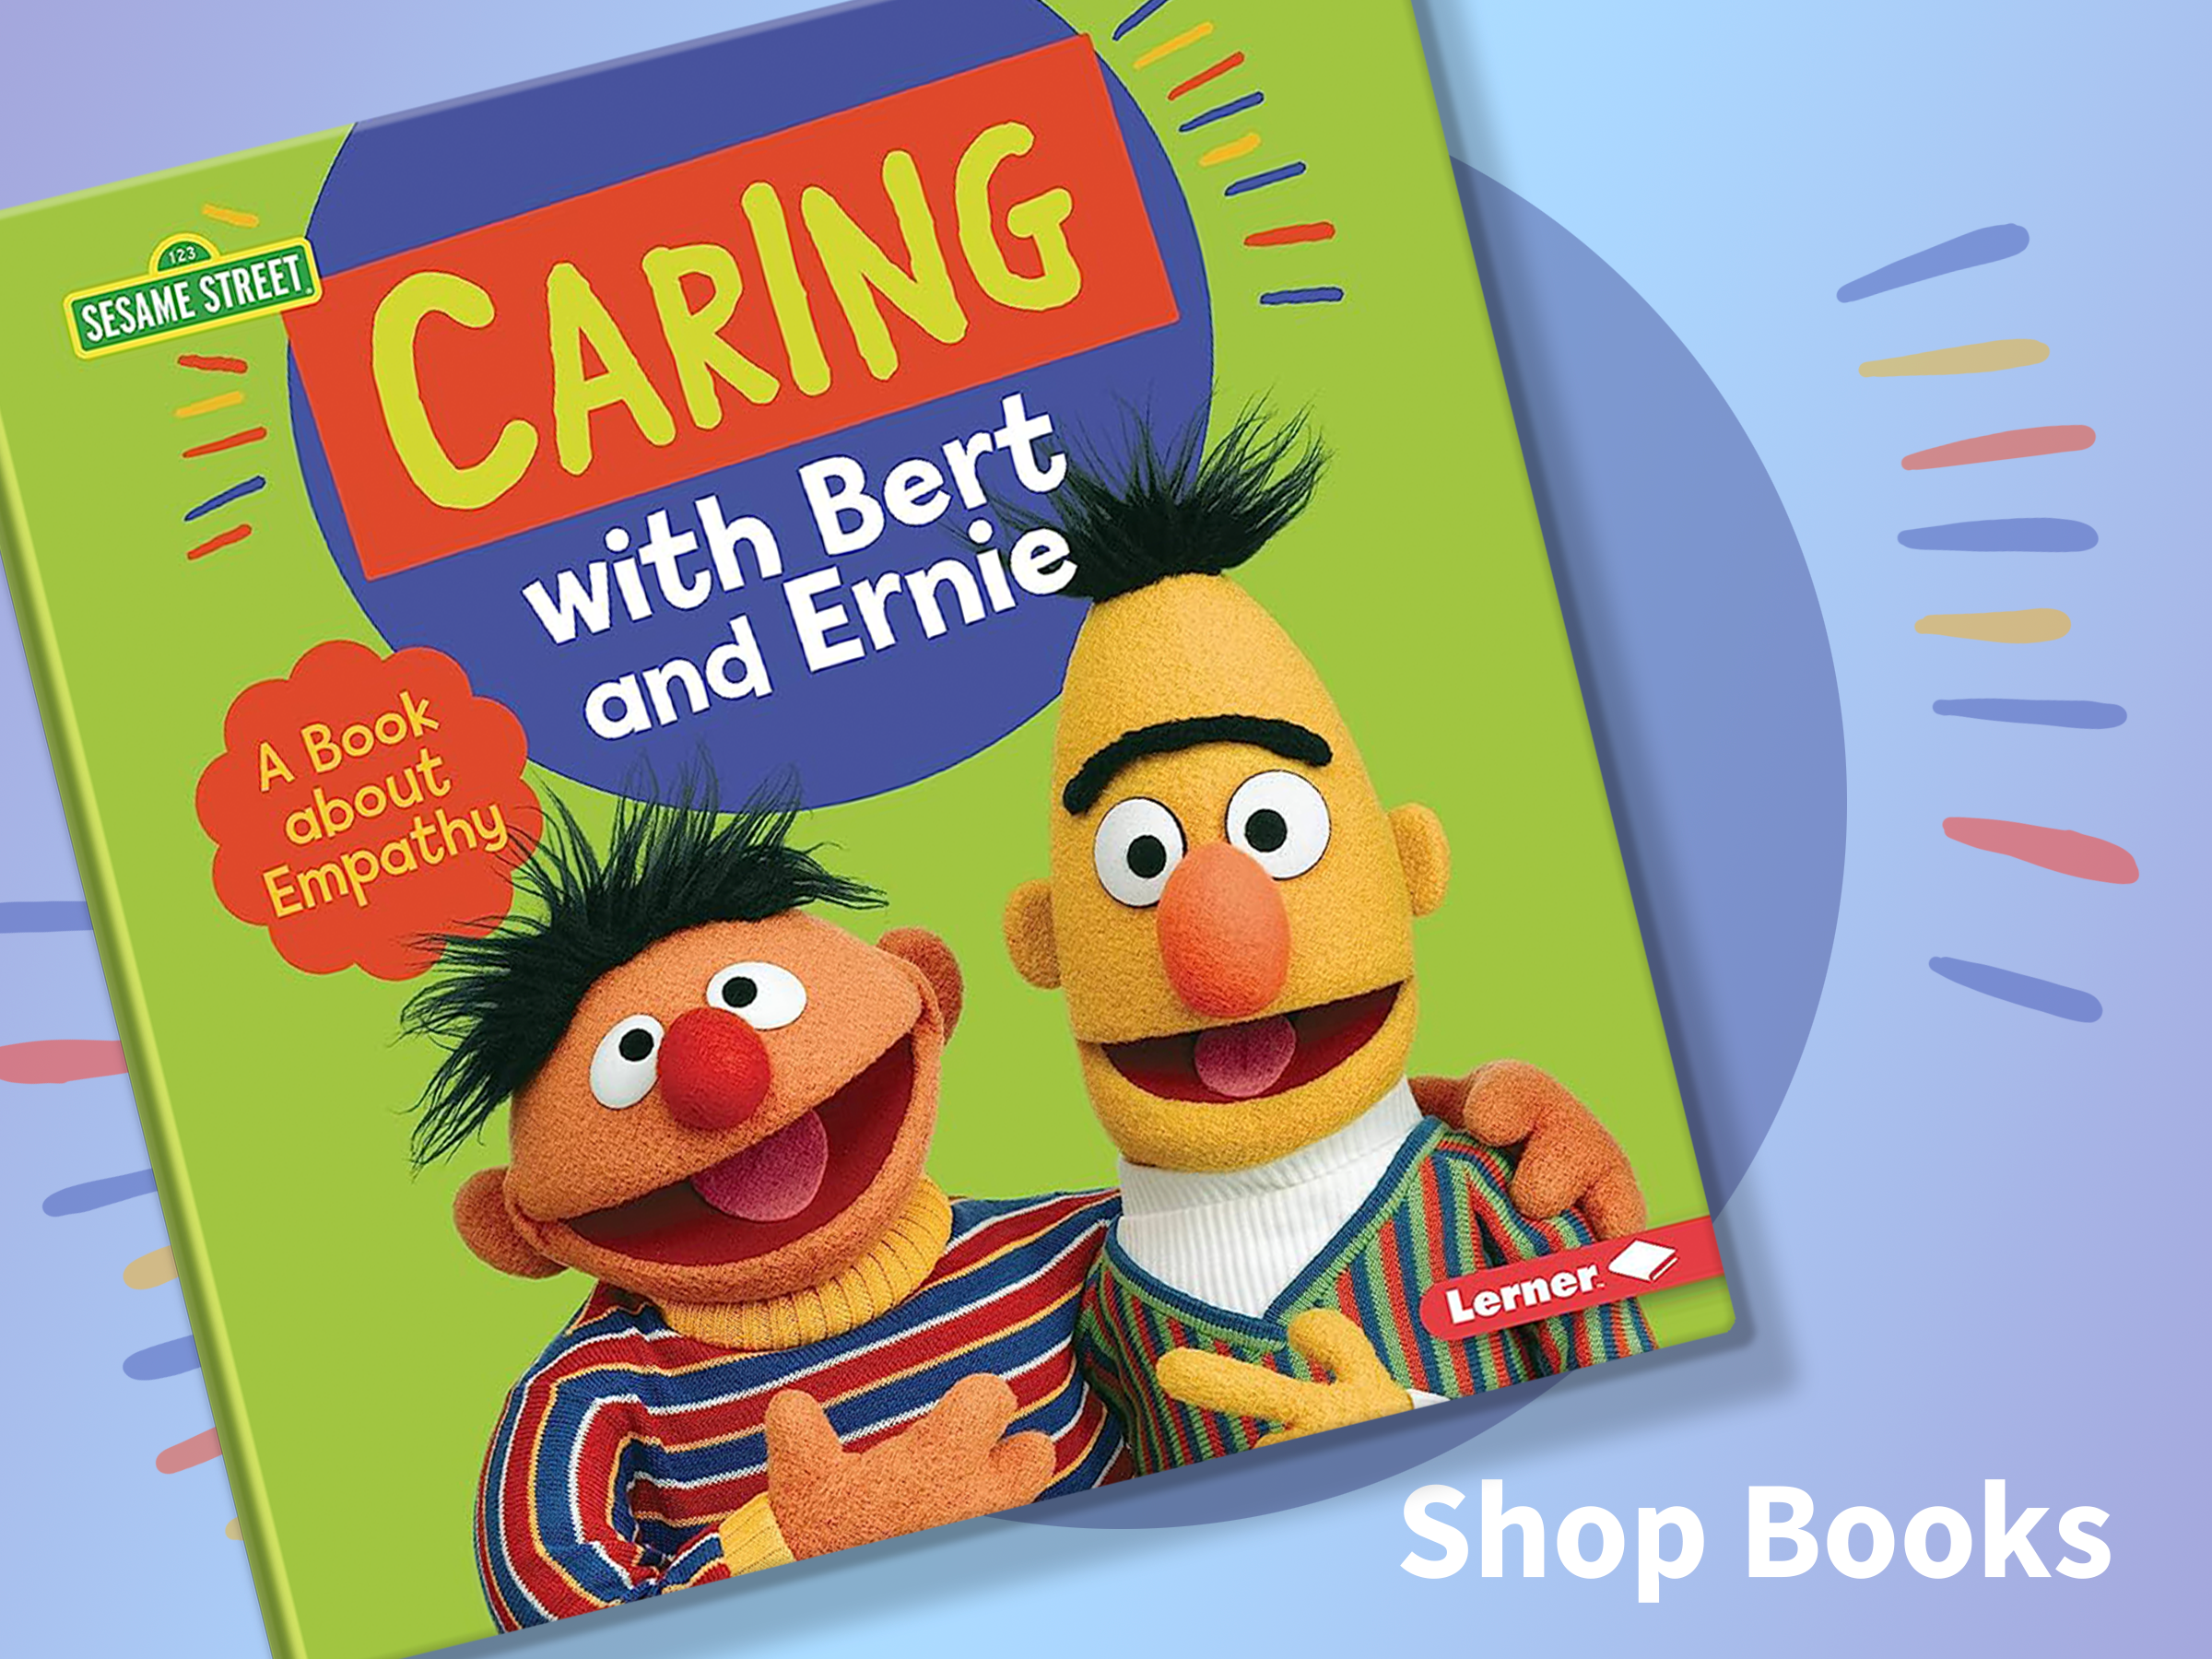 A Book about Empathy with Bert and Ernie